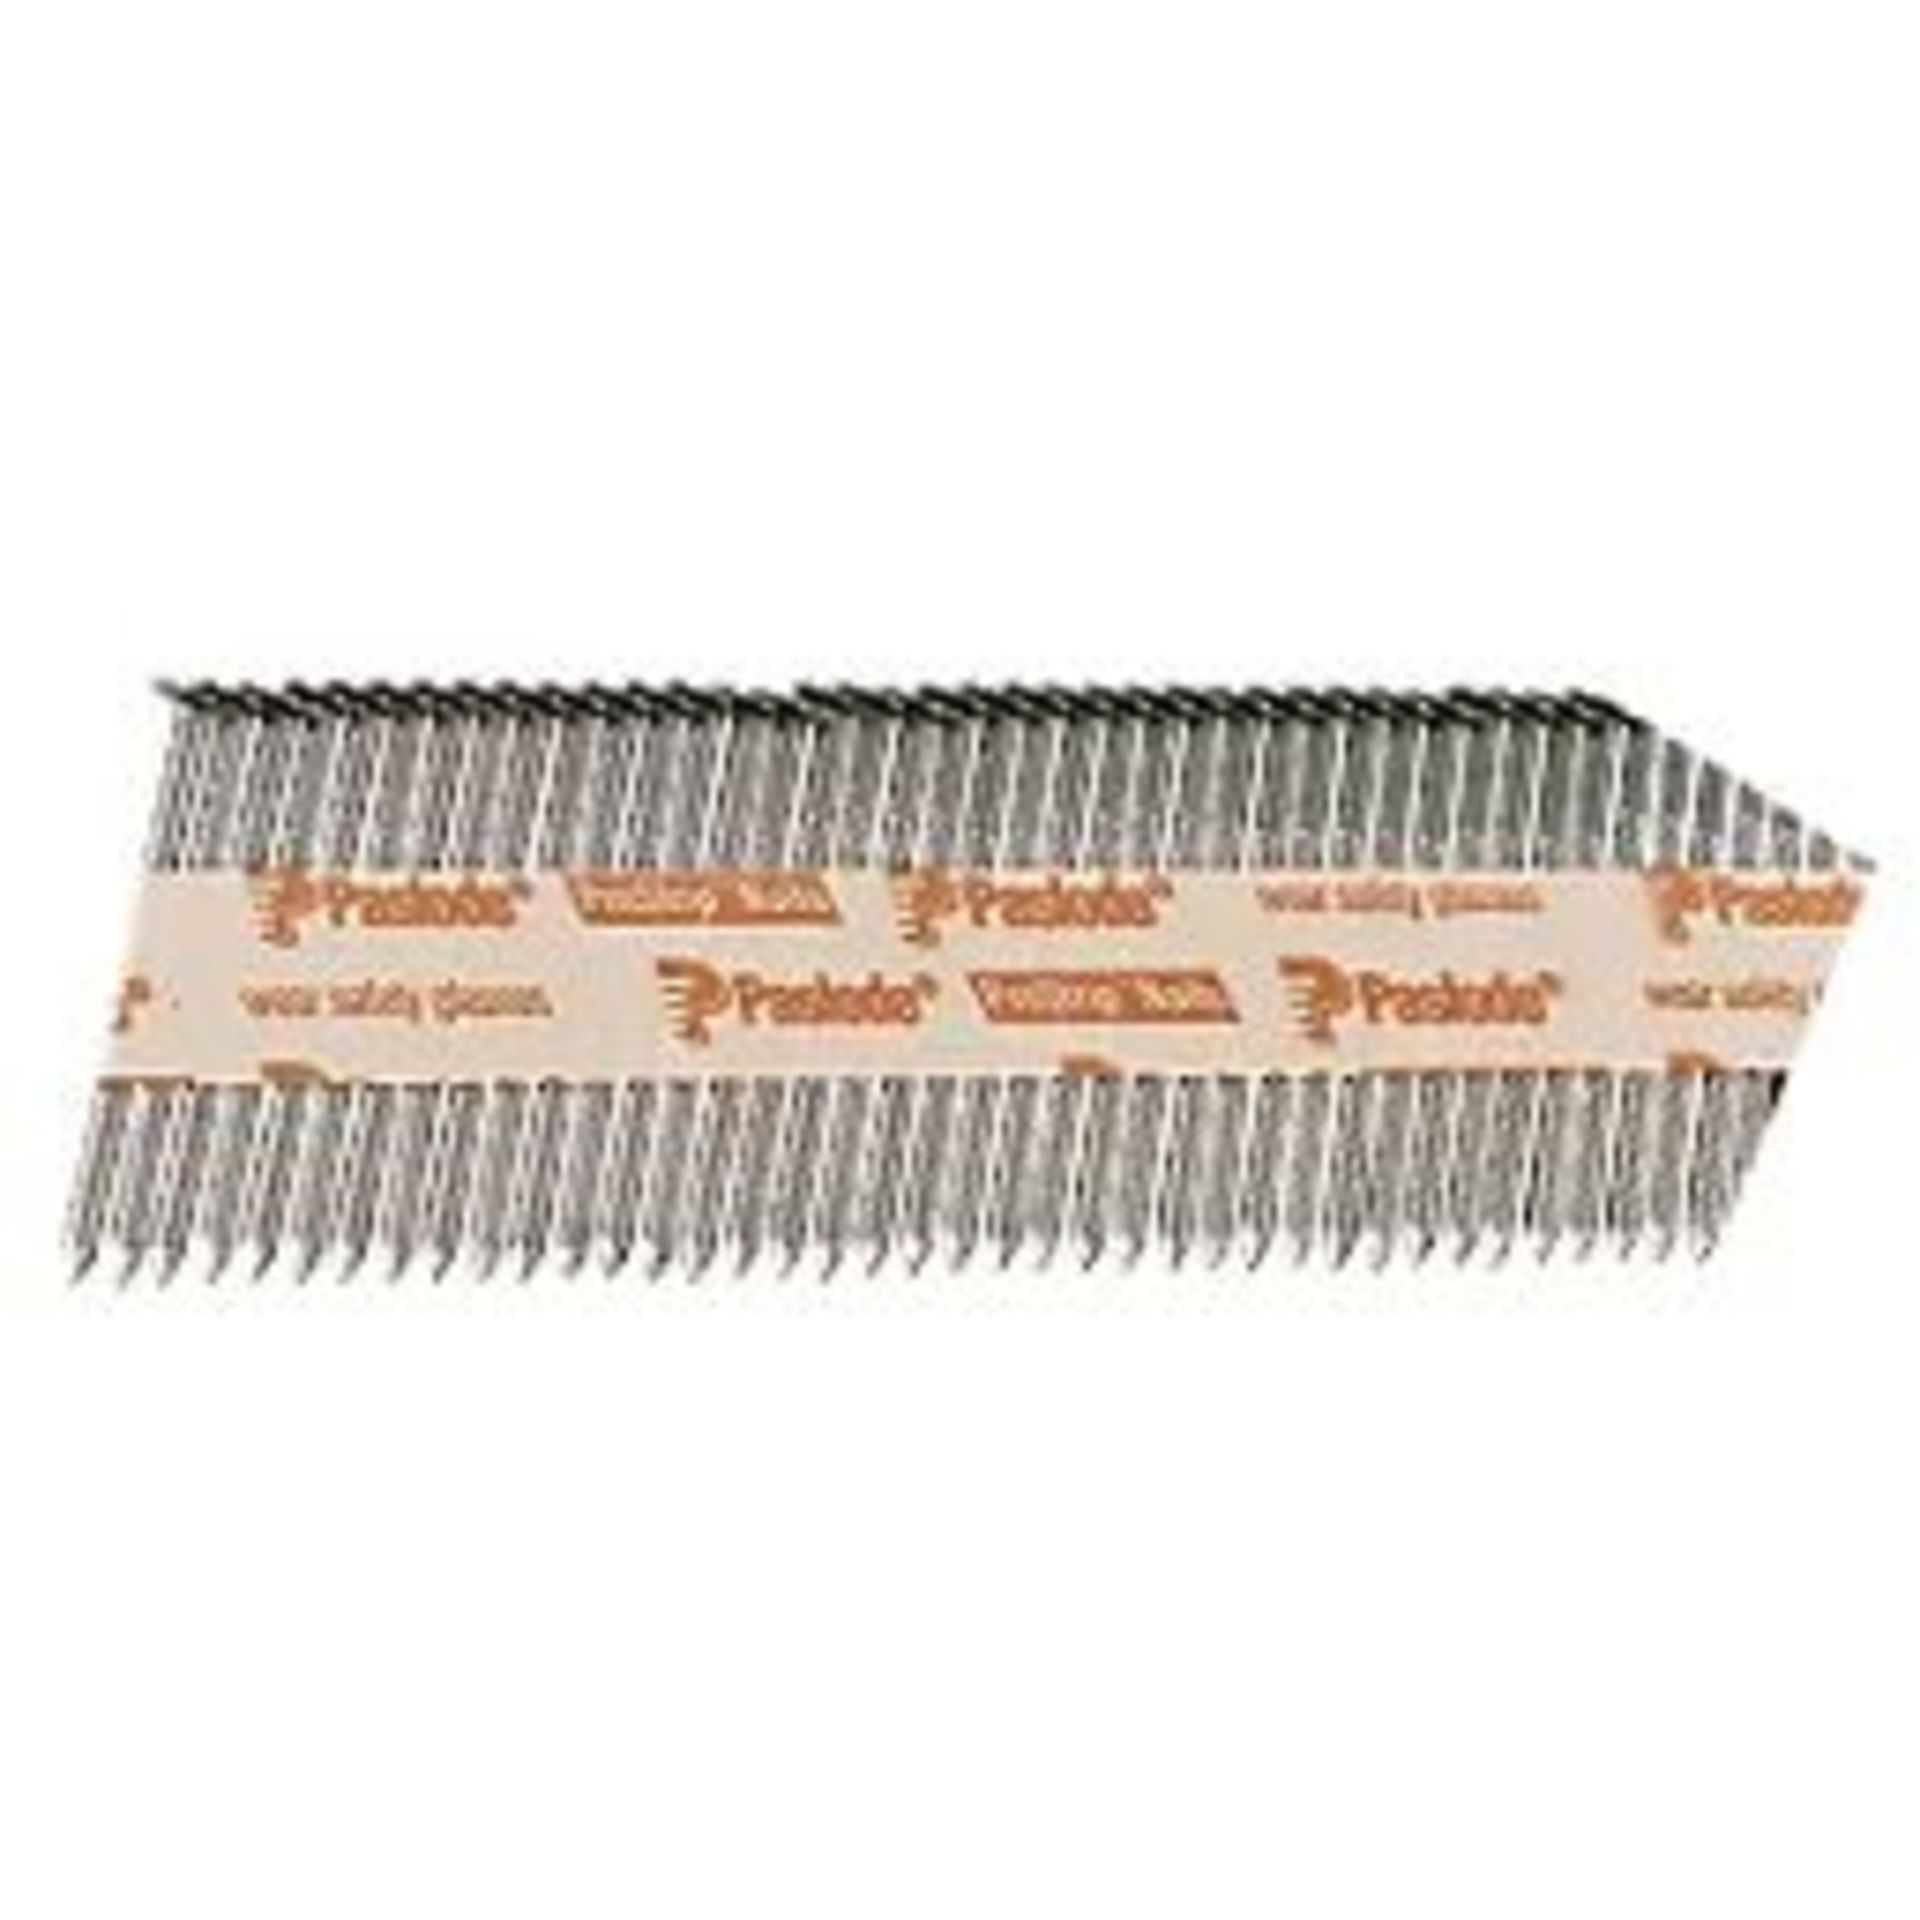 PASLODE GALVANISED-PLUS IM350 COLLATED NAILS 3.1MM X 90MM 2200 PACK. - ER46. RRP £139.99.